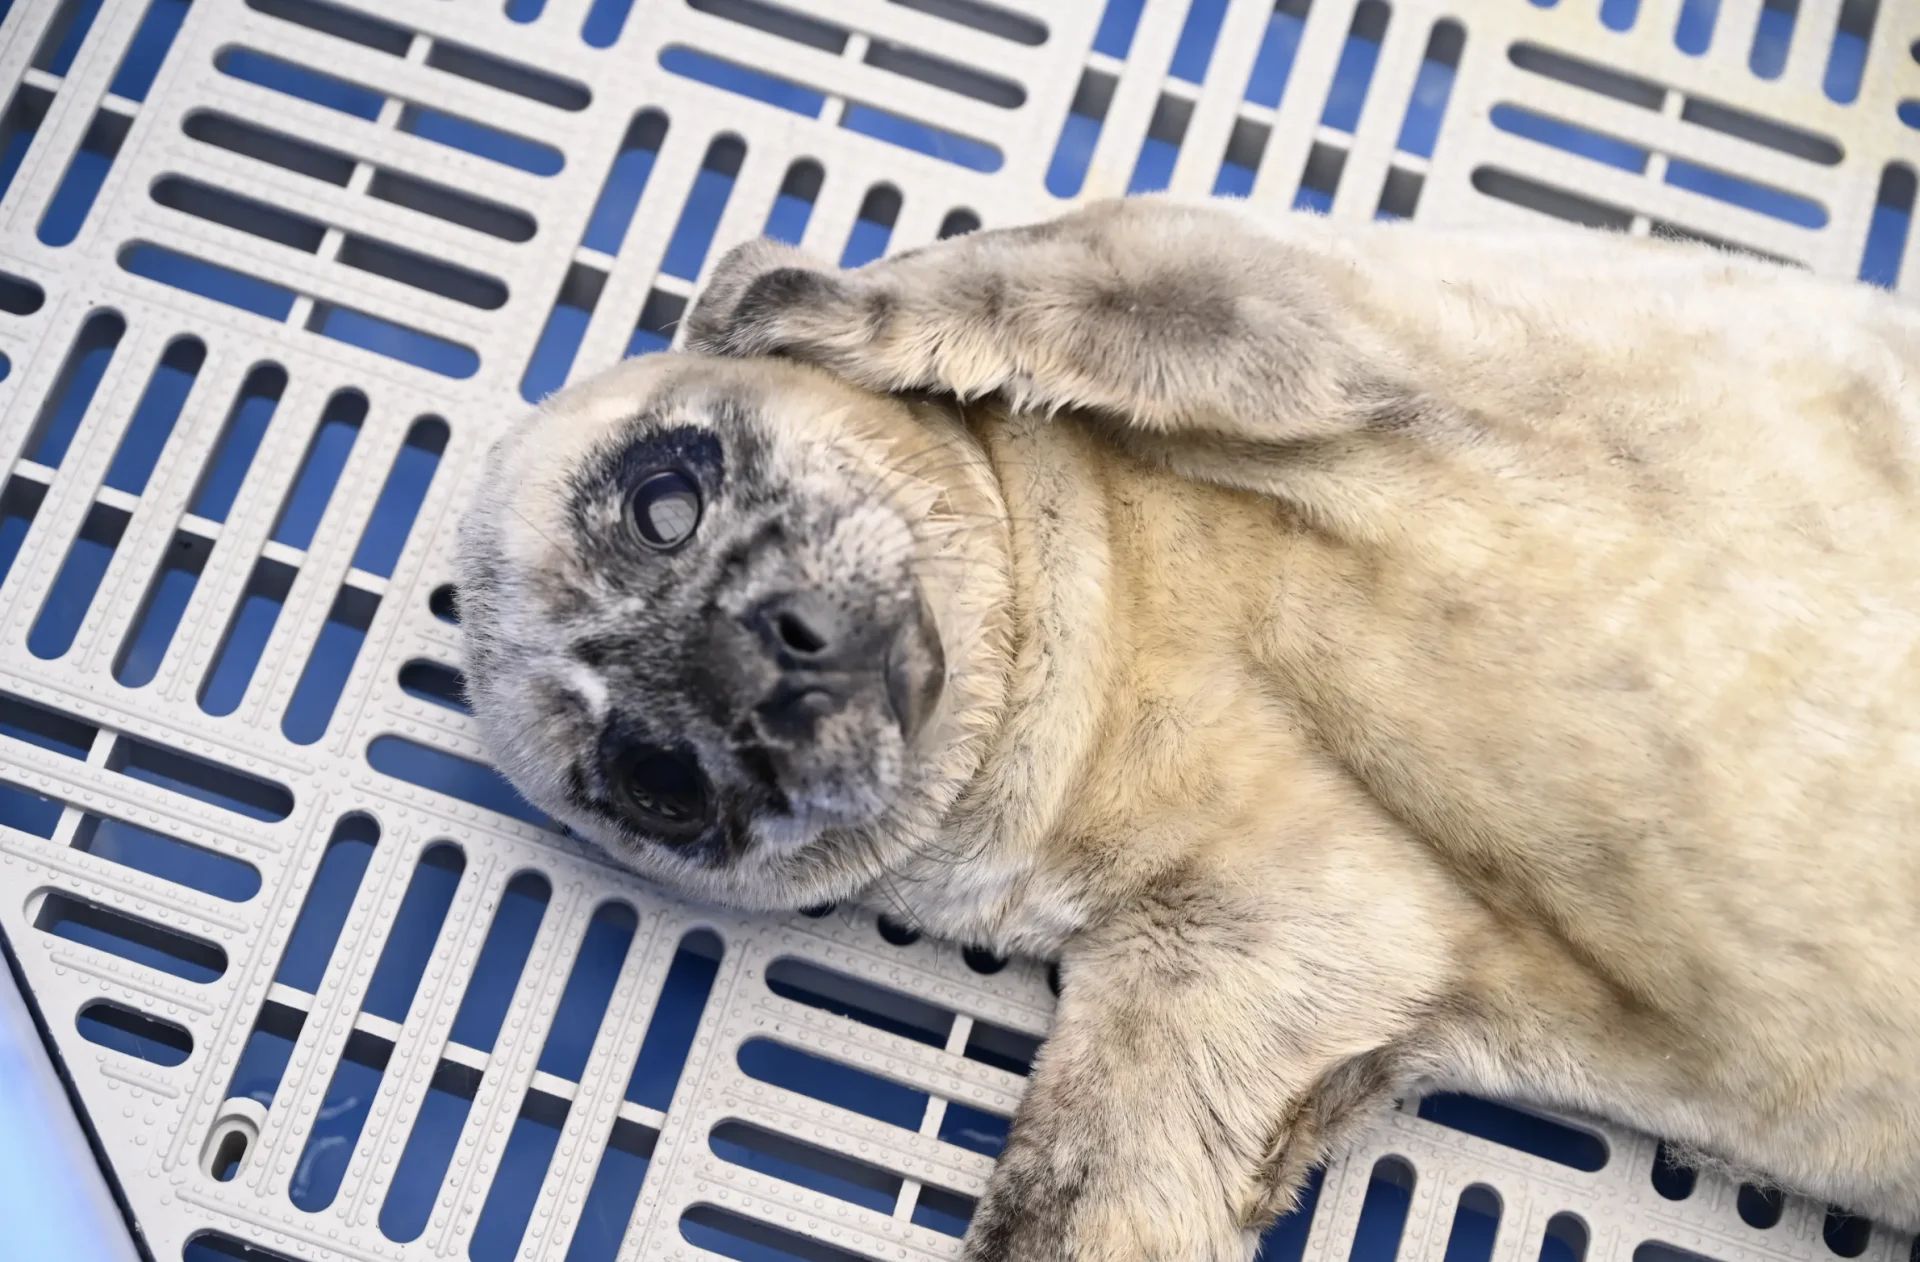 Harbour seal pupping season has arrived, what to do if you spot one in distress